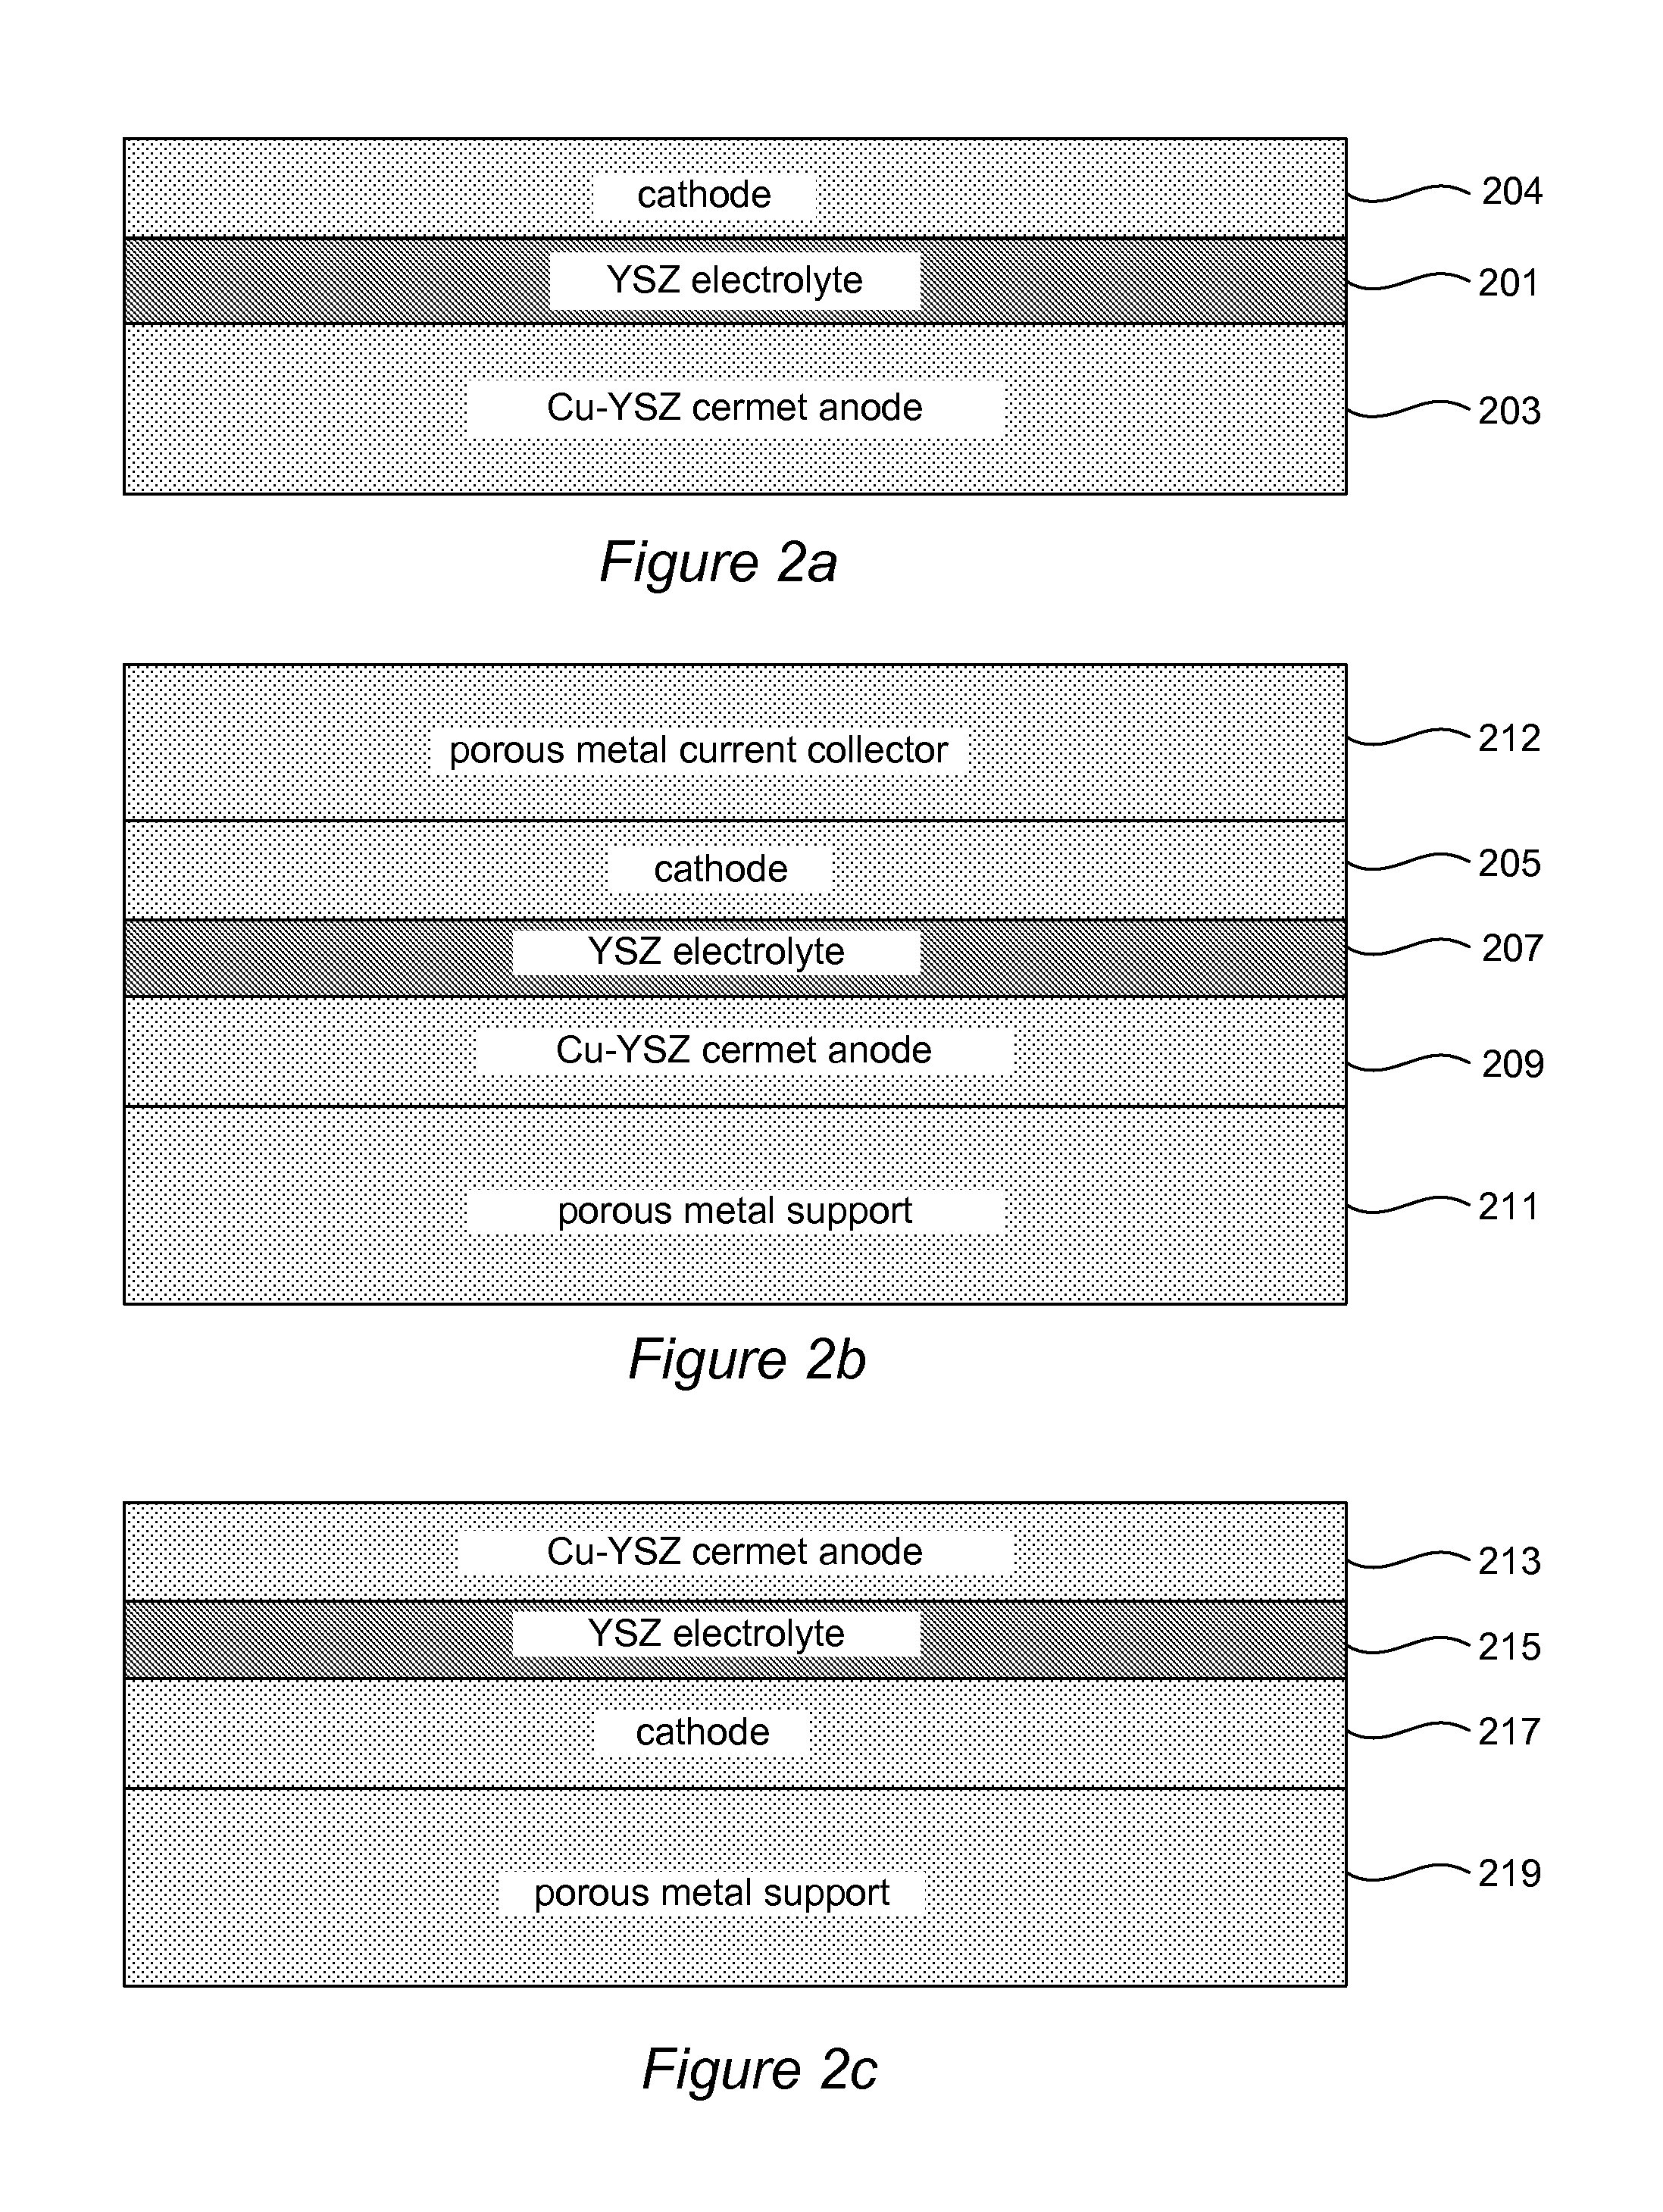 Cu-based cermet for high-temperature fuel cell